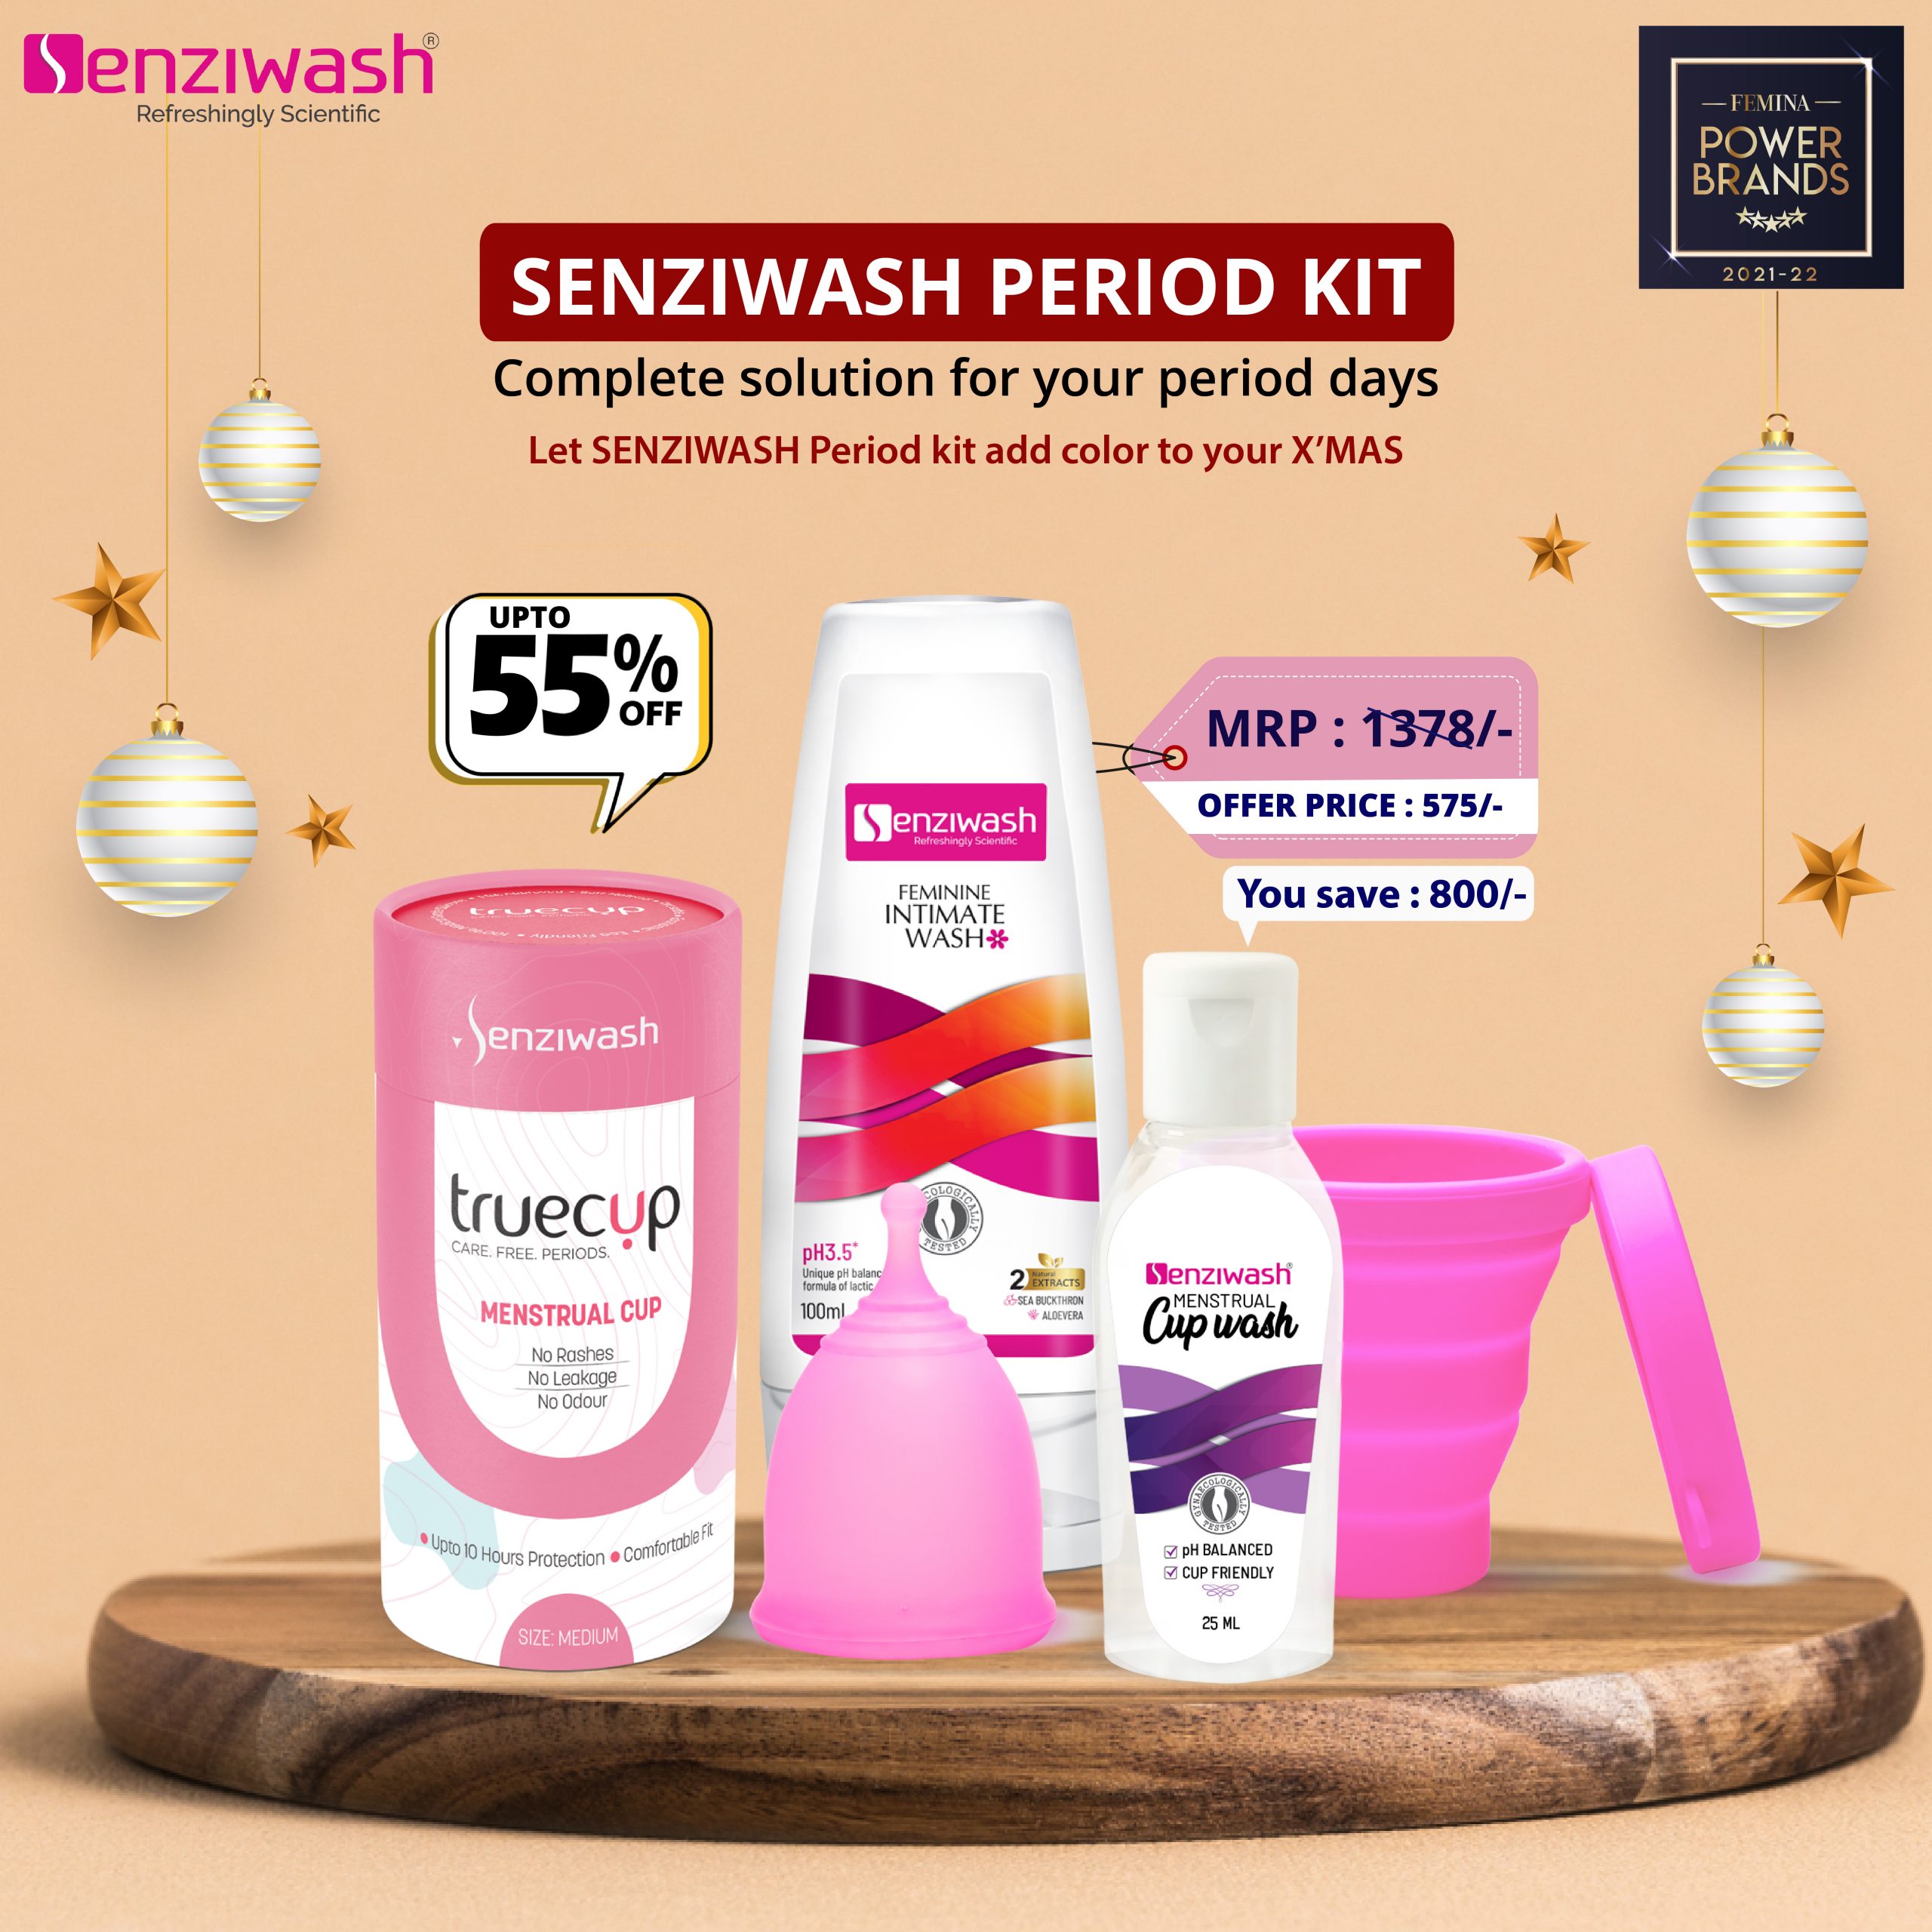 Senziwash Chrismas offer Best period kit, Best Period cup, period kit, period kits period kitne din ka hota hai? period kit, period kitne din tak rahta hai? period kitne din me aana chahiye? period kits for school, period test kit, period kitne age me aata hai, period kits list, period kitne din rahta hai? period kitne din hona chahiye? period check kit, period kitne saal se hota hai? first period kit india, period kit bag, period kit for girlfriend, period kit price, period comfort kit, period kit pouch, period kit in hindi, first period kit, organic period kit, ideas period kit box, period kit for adults, first period kit, reusable first period kit ideas, period kit for travel, period kits for 10 year old, period panty kits, what age should you make a period kit ? What should a period kit have ? period kit checklist, period kits for beginners, Menstrual cups, best menstrual cup, menstrual cups, menstrual cup, menstrual cups how to use? menstrual cup use? best menstrual cups India, menstrual cups price, menstrual cup side effects, menstrual cups how to insert? What is a menstrual cup? Which is the best menstrual cup in India? best menstruation cup, the best menstrual cup, which menstruation cup is best? menstrual cup size, menstrual cup sterilizer, menstrual cup folds, menstrual cups disadvantages, menstrual cup insert, menstrual cups best brands, menstrual cup size chart, is menstrual cups safe? menstrual cups meaning, best menstrual cup brand in India, best menstrual cup brand, menstrual cup use step by step, menstrual cups reviews, menstrual cups amazon, menstrual cups near me, menstrual cup small size, menstrual cups benefits, Intimate wash women, intimate wash, what is intimate wash, men's intimate wash, benefits women's intimate hygiene wash, women's intimate wash, feminine intimate wash, use women's intimate wash products, ladies intimate wash, intimate wash brands, why intimate wash is used? What does intimate wash do? women's intimate body wash, what does intimate wash mean? menstrual cup sterilizer, menstrual cup with sterilizer, menstrual cup sterilizer container, menstrual cup vs pads which is better? sterilizer for menstrual cup, menstrual cup steam sterilizer, menstrual cup sterilizer, electric menstrual cup sterilizer in India, how to sterilize menstrual cup at home? which brand of menstrual cup sterilizer is best? menstrual cup sterilizer machine, best menstrual cup sterilizer, menstrual cup after use, when to sterilize menstrual cup? menstrual cup sterilizer cup? How to use a menstrual cup sterilizer? sterilizer menstrual cup, can you sterilize menstrual cup in the microwave? Do we have to sterilize the menstrual cup? Do you have to sterilize the menstrual cup? portable menstrual cup sterilizer, menstrual cup and sterilizer, menstrual cup sterilizer reviews, menstrual cup sterilizer silicone, sterilizing tablets for menstrual cup, microwave menstrual cup sterilizer, best menstrual cup steam sterilizer, menstrual cup sterilizing tablets, are menstrual cups or discs better? menstrual cup microwave sterilizer, menstrual cup sterilizer UV, best way to sterilize menstrual cup, how often should I clean my menstrual cup? menstrual cup sterilizer steamer menstrual cup sterilizer reddit, how often do you need to sterilize menstrual cup? How often should you sterilize a menstrual cup? menstrual cup sterilizer, which menstrual cup size should I use? Best menstrual cup steamer sterilizer? how to properly sterilize a menstrual cup ? menstrual cup steam sterilize India, pixie menstrual cup steamer sterilizer, cleaner menstrual cup sterilizing tablets, menstrual cup sterilizer bag, steam sterilizer menstrual cup, menstrual cup sterilizer in India, menstrual cup UV sterilizer, how menstrual cup sterilizers work? do I need to sterilize my menstrual cup, best menstrual cup sterilizer in India, menstrual cup sterilizer prices, menstrual cup sterilizer UK, menstrual cup sterilizing pot, how often sterilize menstrual cup? menstrual cup sterilization time, menstrual cup sterilizer price in India, how often should I sanitize my menstrual cup? How to sterilize menstrual cups? How often should you sterilize your menstrual cup? menstrual cup how to sterilize? menstrual cup sterilizer near me, Menstrual cup wash, menstrual cup washing, menstrual cup wow, menstrual cup washing liquid, how many times a menstrual cup can be used? menstrual cup washer, how many hours need to sterilize a menstrual cup? Why do menstrual cups use menstrual cup wash? Can I wash my menstrual cup with soap? Where is the menstrual cup inserted? Can I wash my menstrual cup with v wash? freedom menstrual cup and wash, how to remove a menstrual cup without spilling? menstrual cup wash, soap wash menstrual cup between uses, what to use to clean menstrual cup, best menstrual cup wash wash for menstrual cup, feminine wash for menstrual cup, do you have to wash a menstrual cup every time? Soaps to wash menstrual cups, best menstrual cup wash in India, how to use menstrual cup wash? how to wash the menstrual cup after use? best wash for menstrual cup, how often should I clean my menstrual cup? menstrual cup how to wash? menstrual cup wash India, How to wash a menstrual cup at work?sanitary pads alternative, alternative for sanitary napkins, alternative for pads during periods,what to use instead of sanitary pads,how often should sanitary pads be changed,alternative for menstrual pads,best alternative to sanitary pads, Feminine hygiene, Menstrual hygiene ,Menstrual cycle. Period care, period hygiene